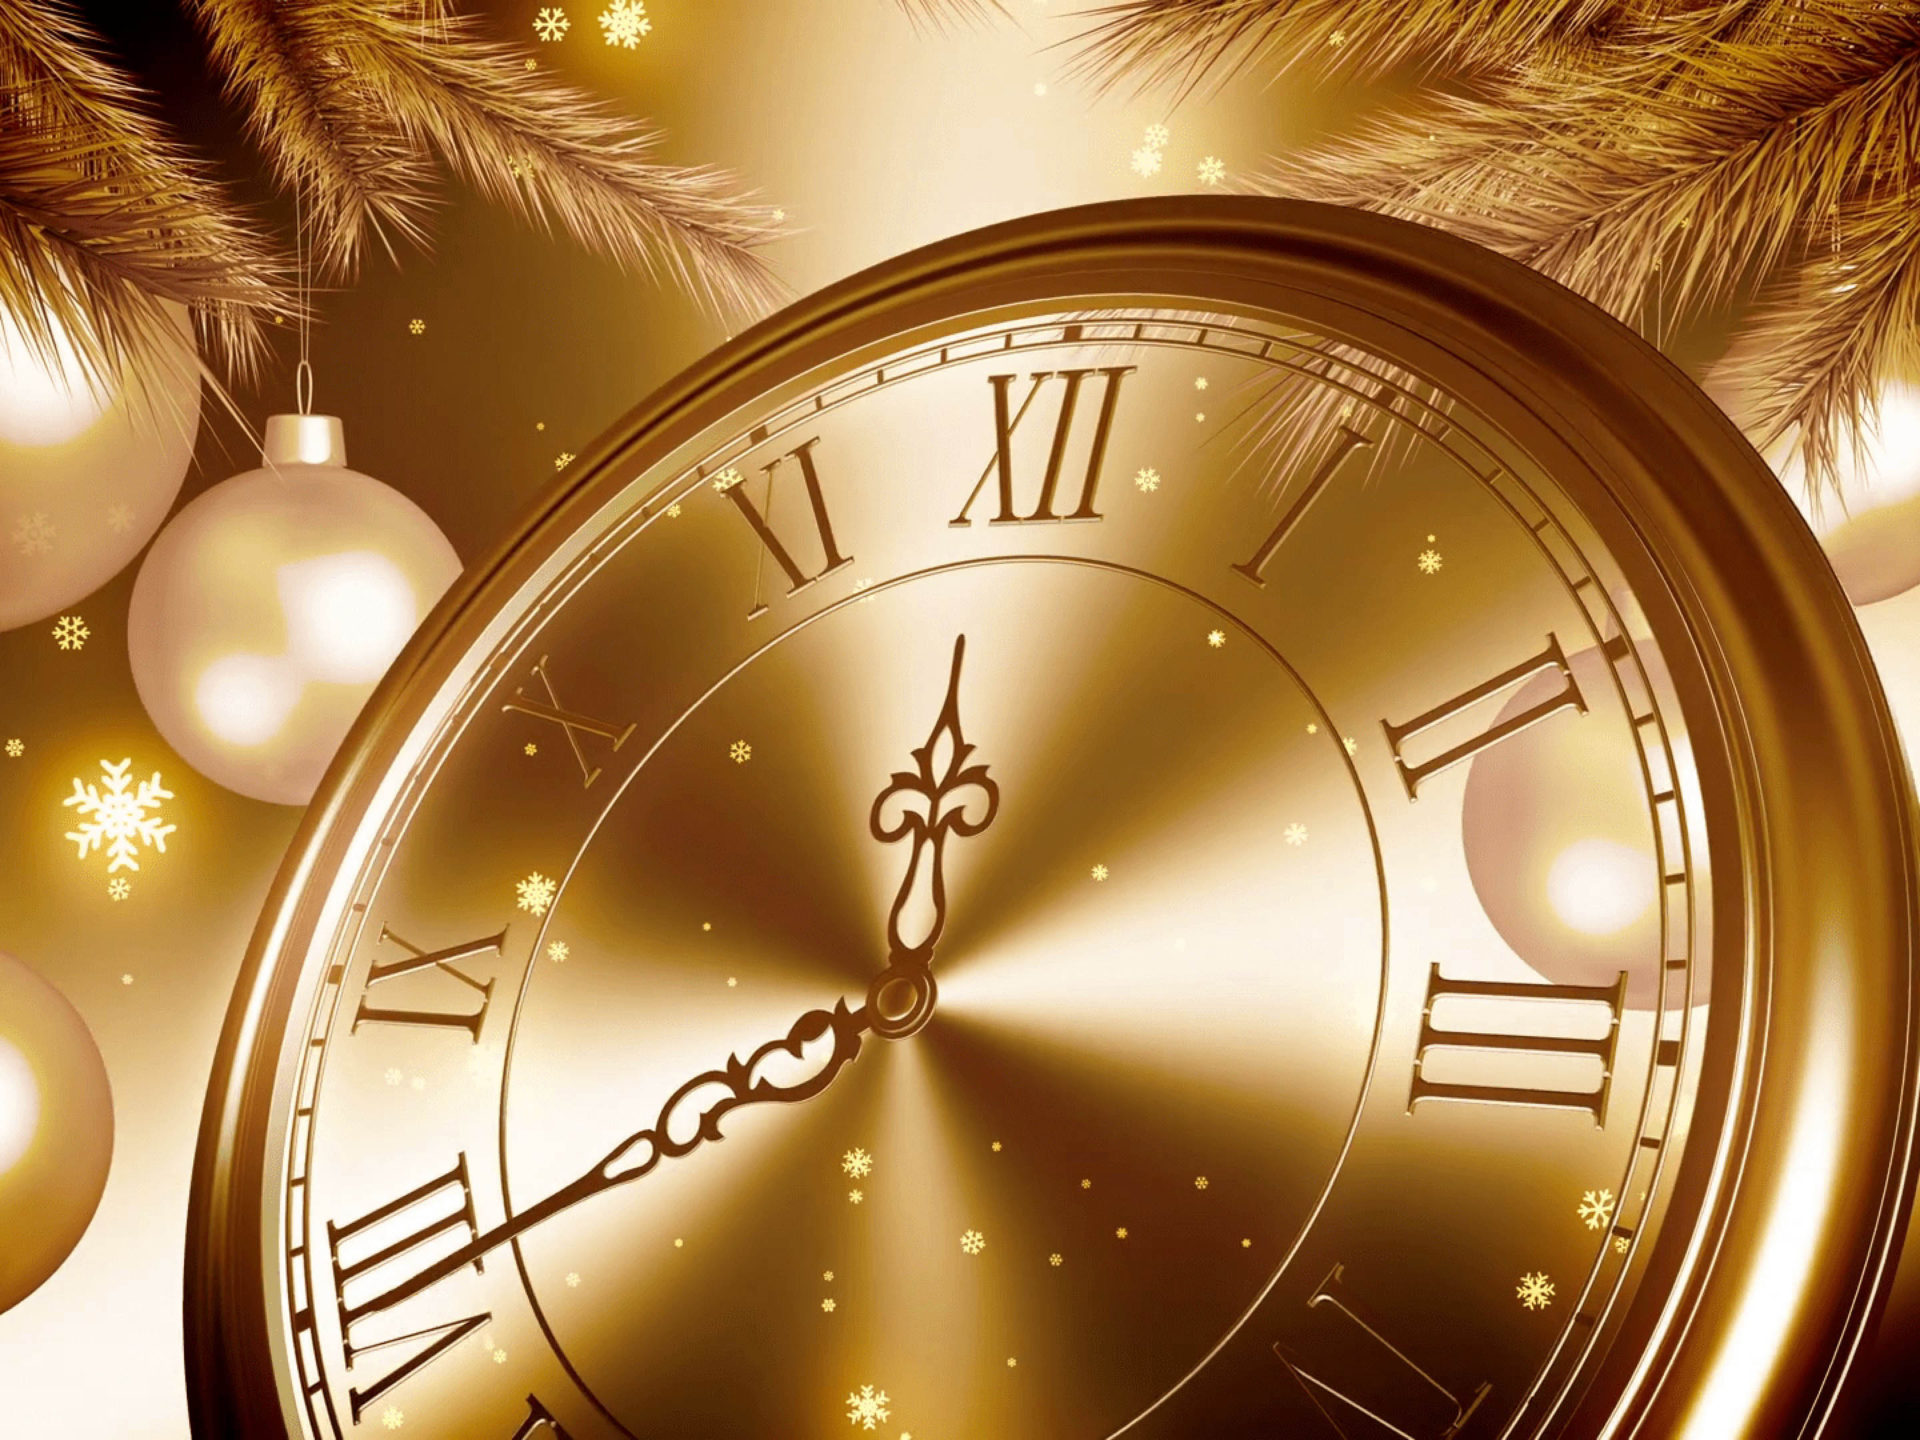 Happy New Year 2022 Golden Clock Countdown In New Year's Eve Desktop Wallpaper For Computers Laptop Tablet And Mobile Phones, Wallpaper13.com